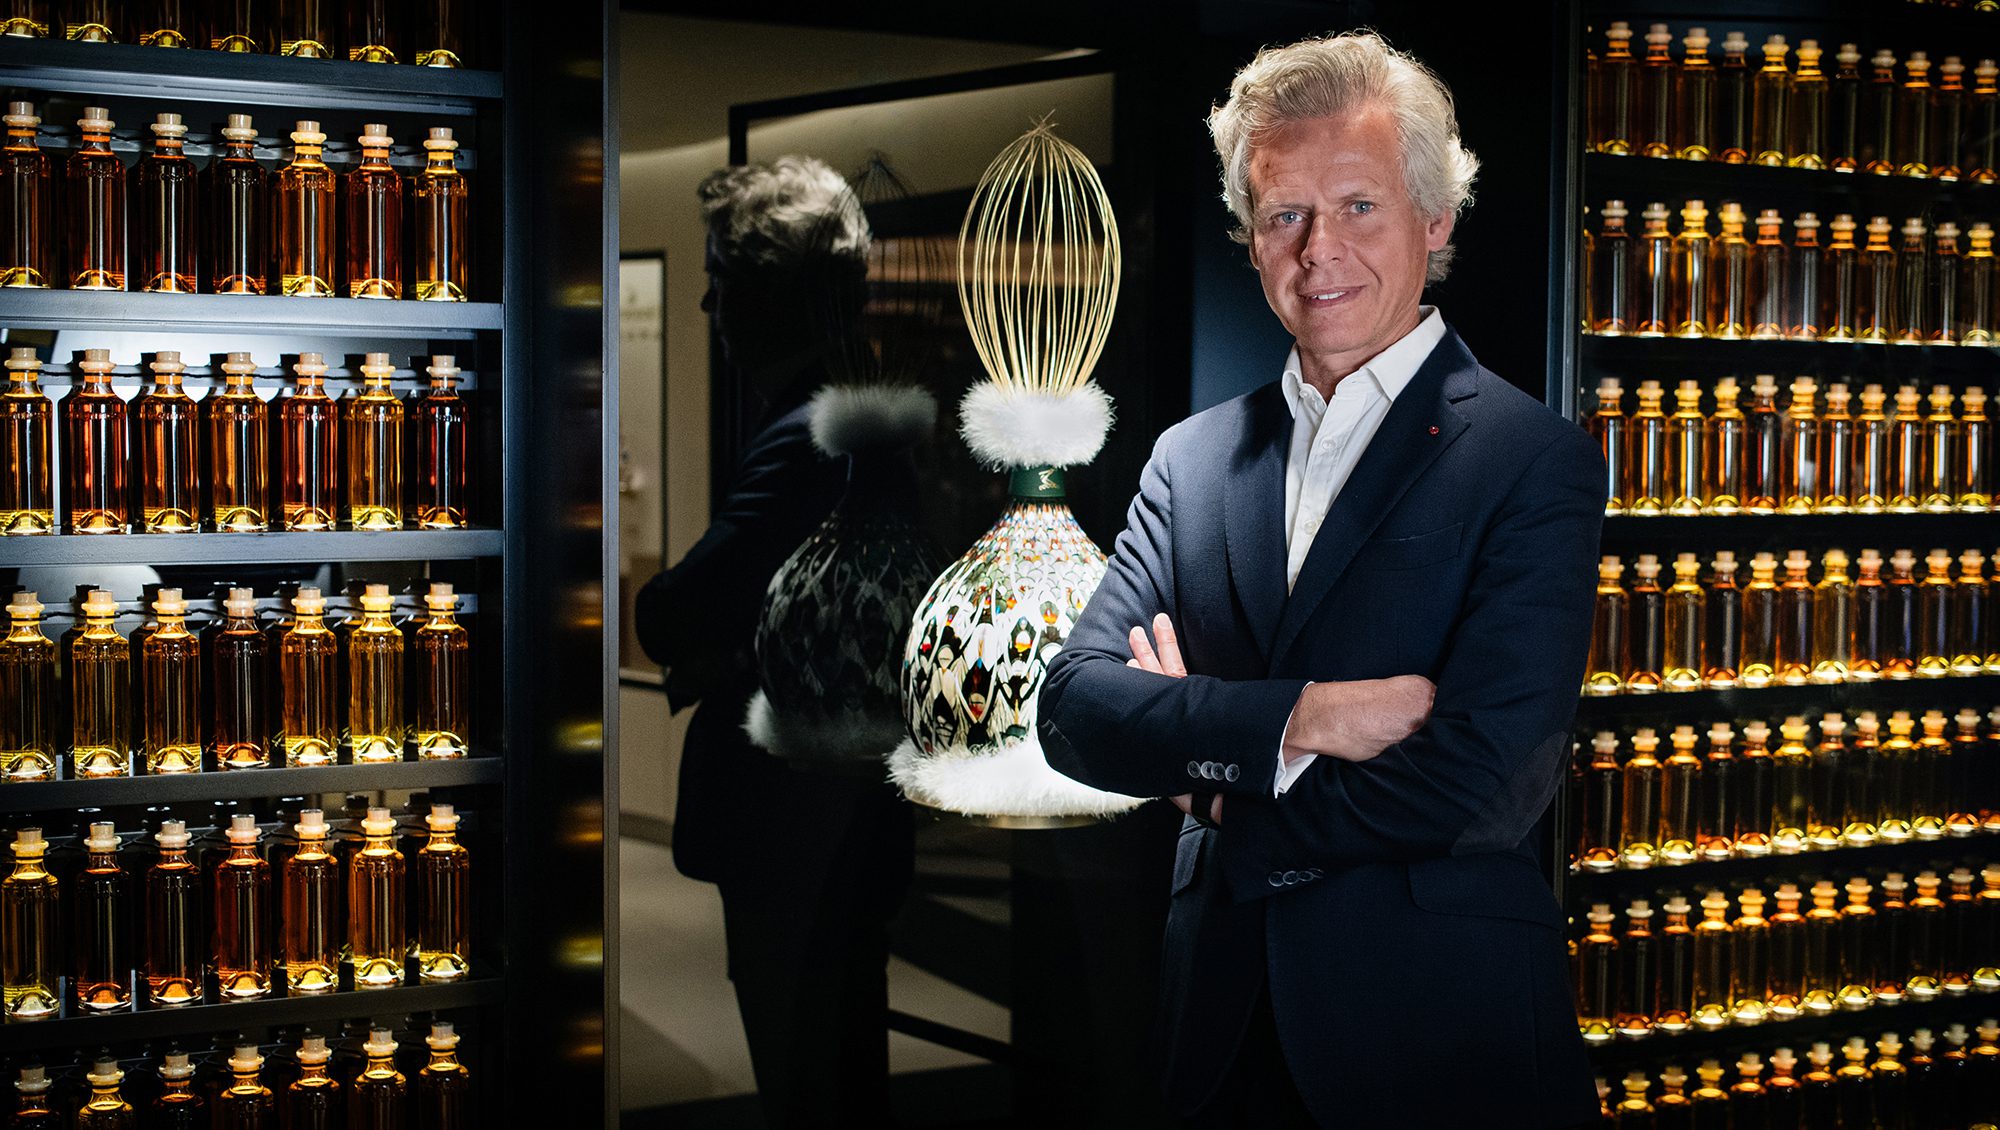 Luxembourger named CEO of Moët Hennessy